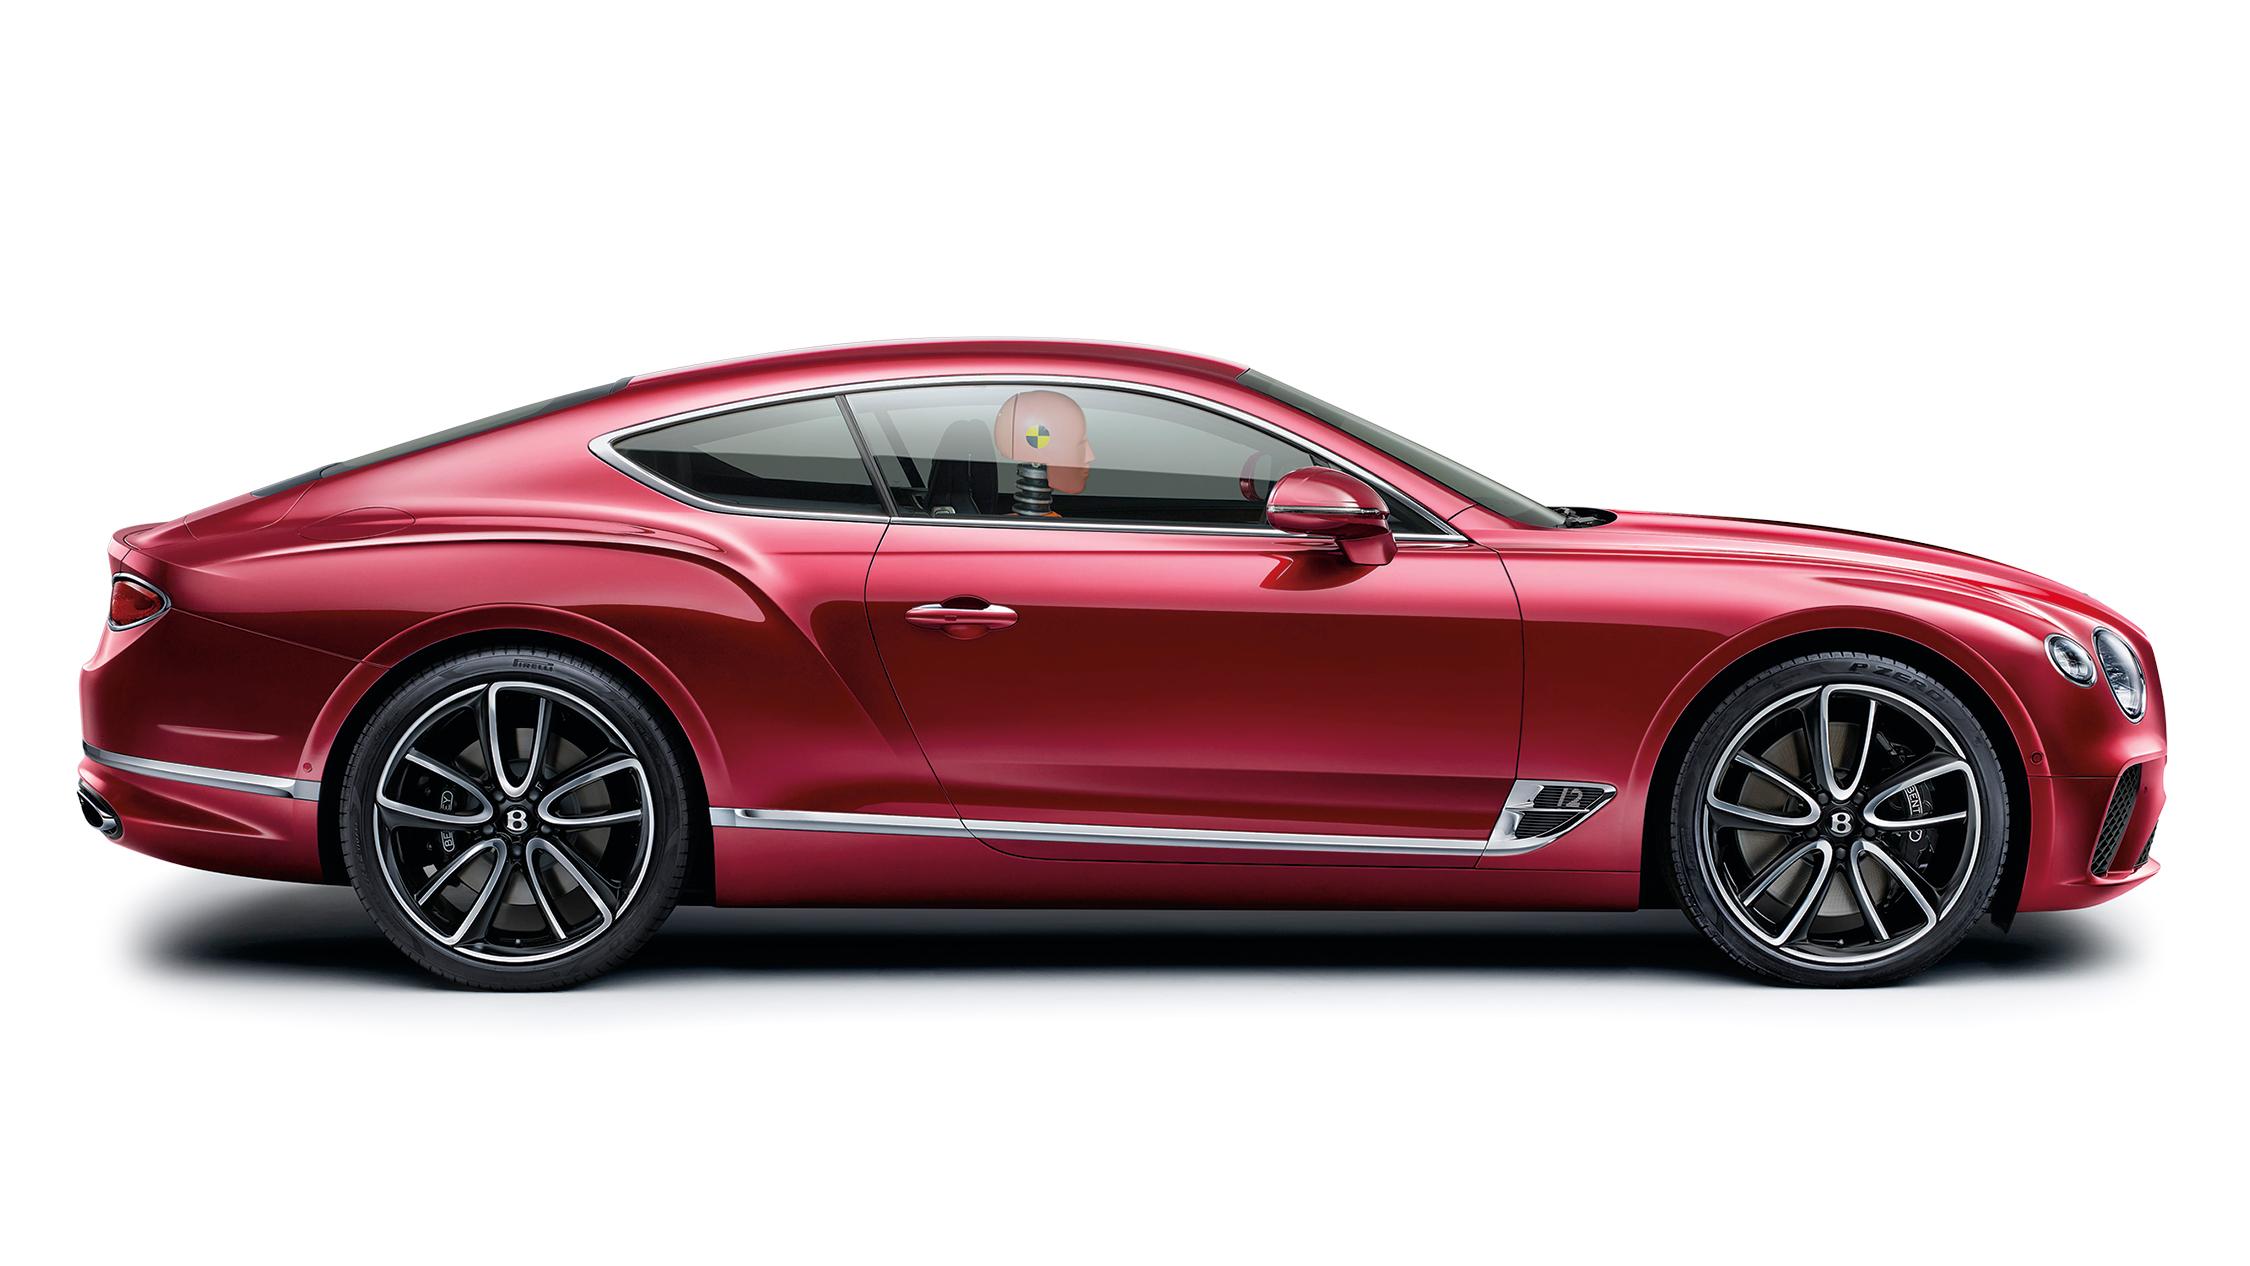 Jeremy Clarkson's best cars of 2018: Bentley Continental GT